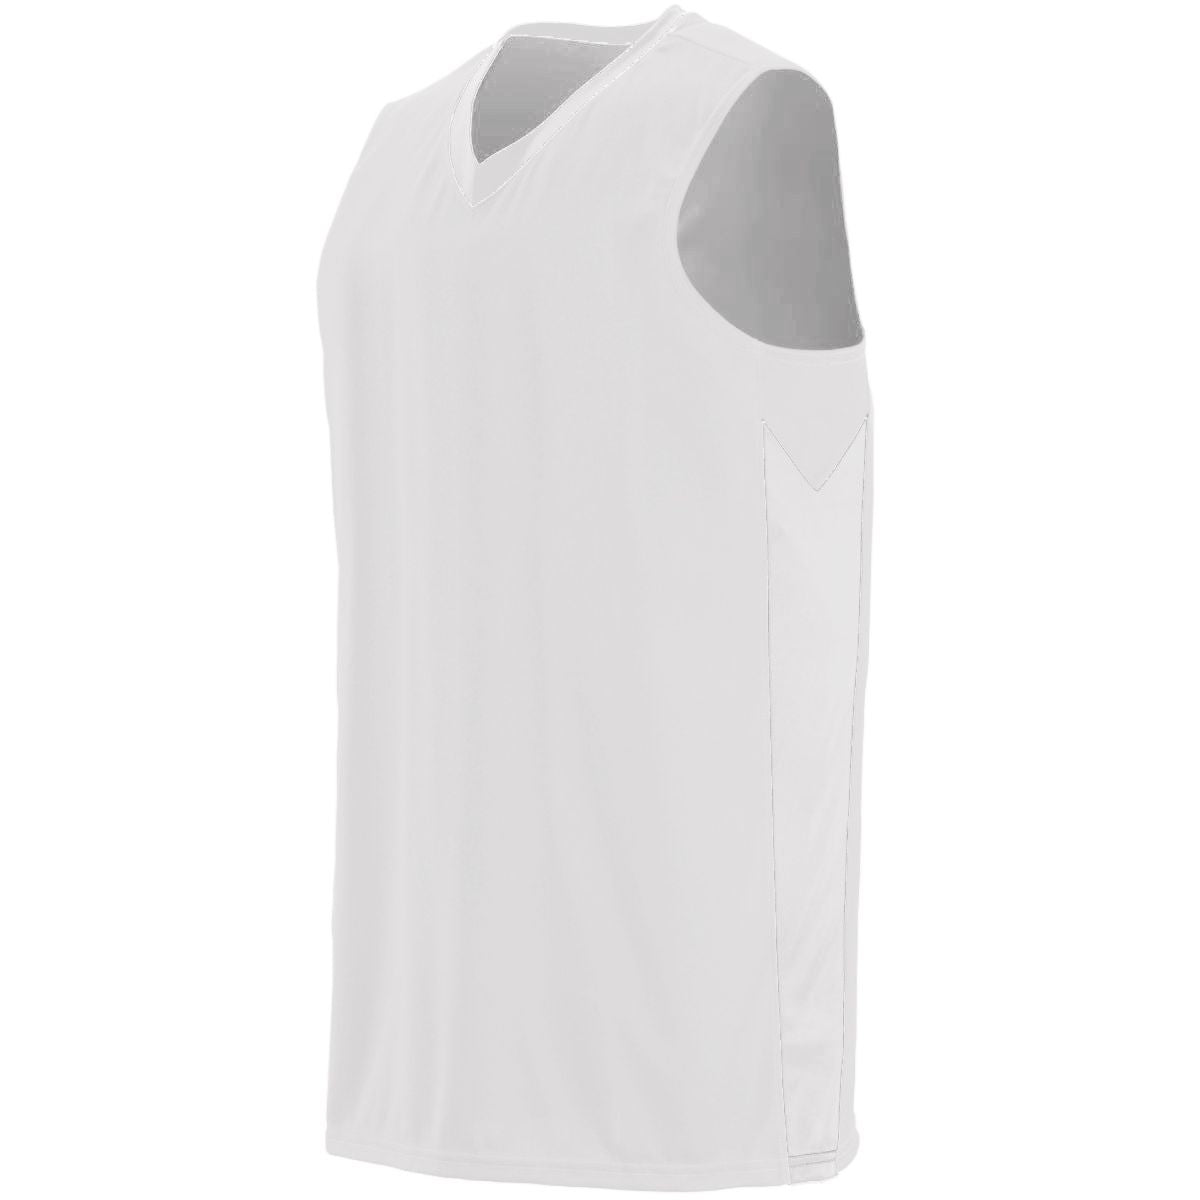 Augusta Sportswear Youth Block Out Jersey in White/White  -Part of the Youth, Youth-Jersey, Augusta-Products, Basketball, Shirts, All-Sports, All-Sports-1 product lines at KanaleyCreations.com